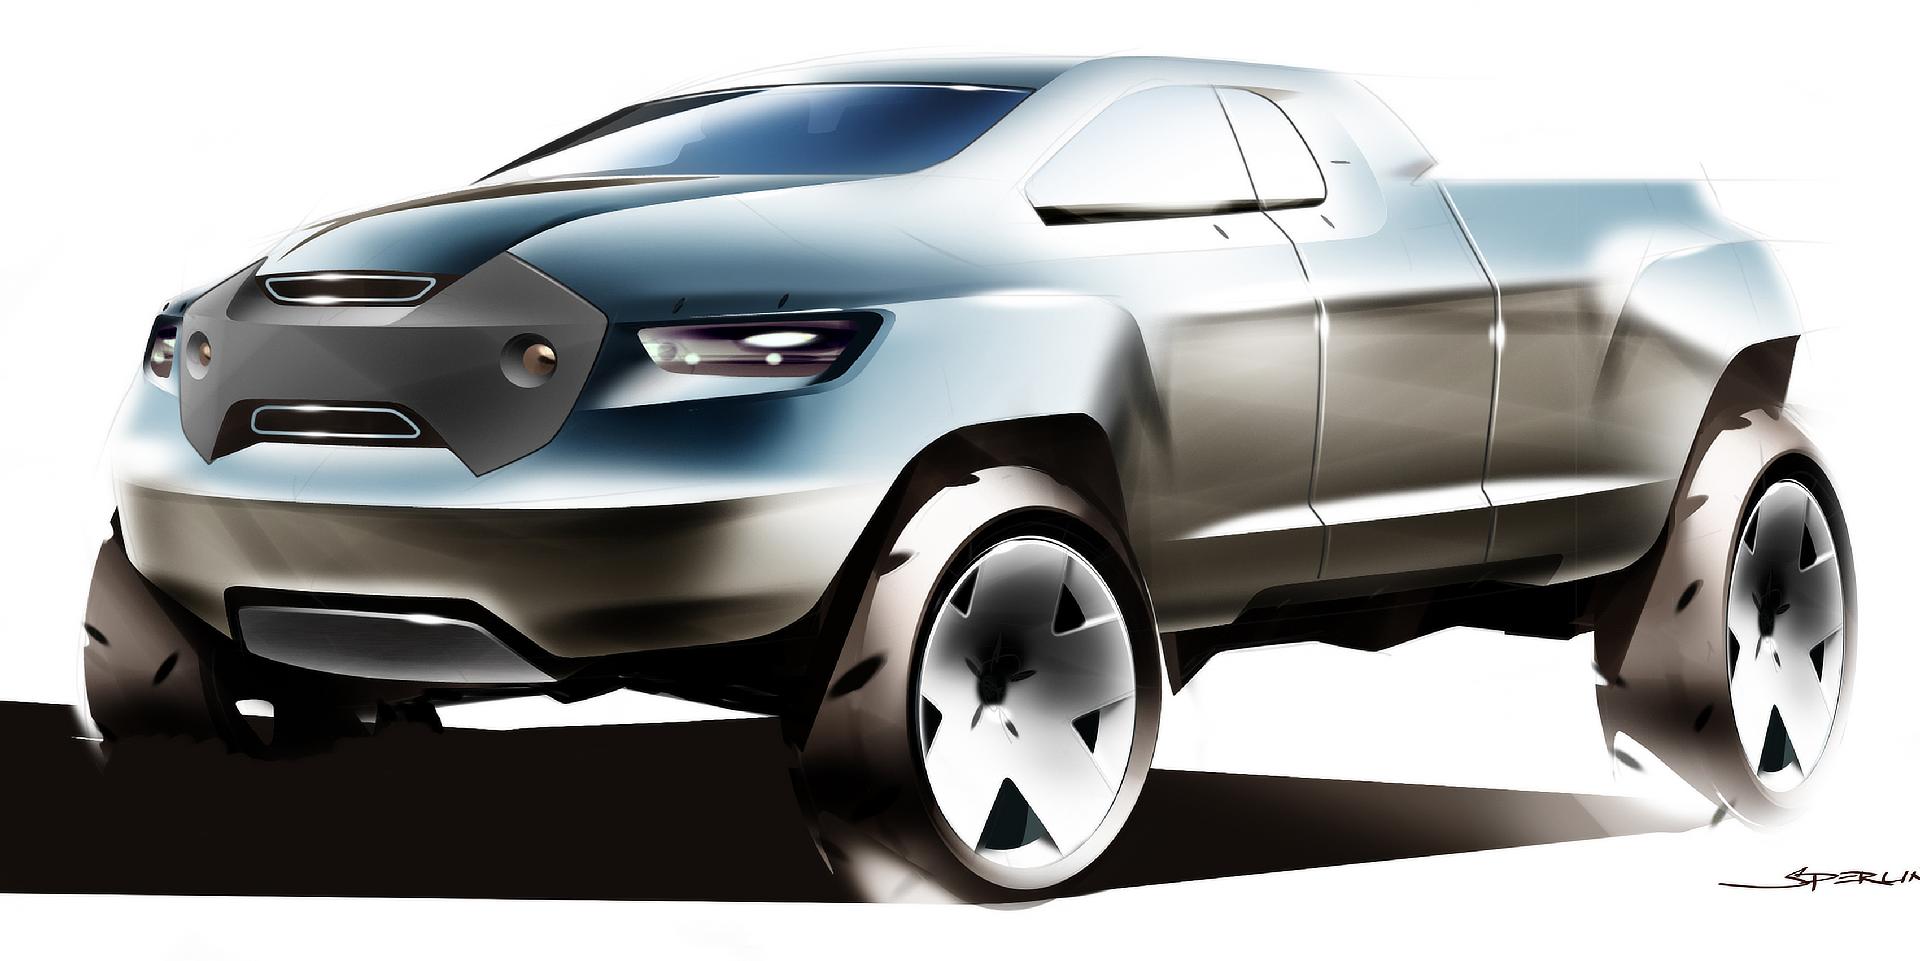 Toyota FTX concept (unveiled at the North American International Auto Show in 2004)